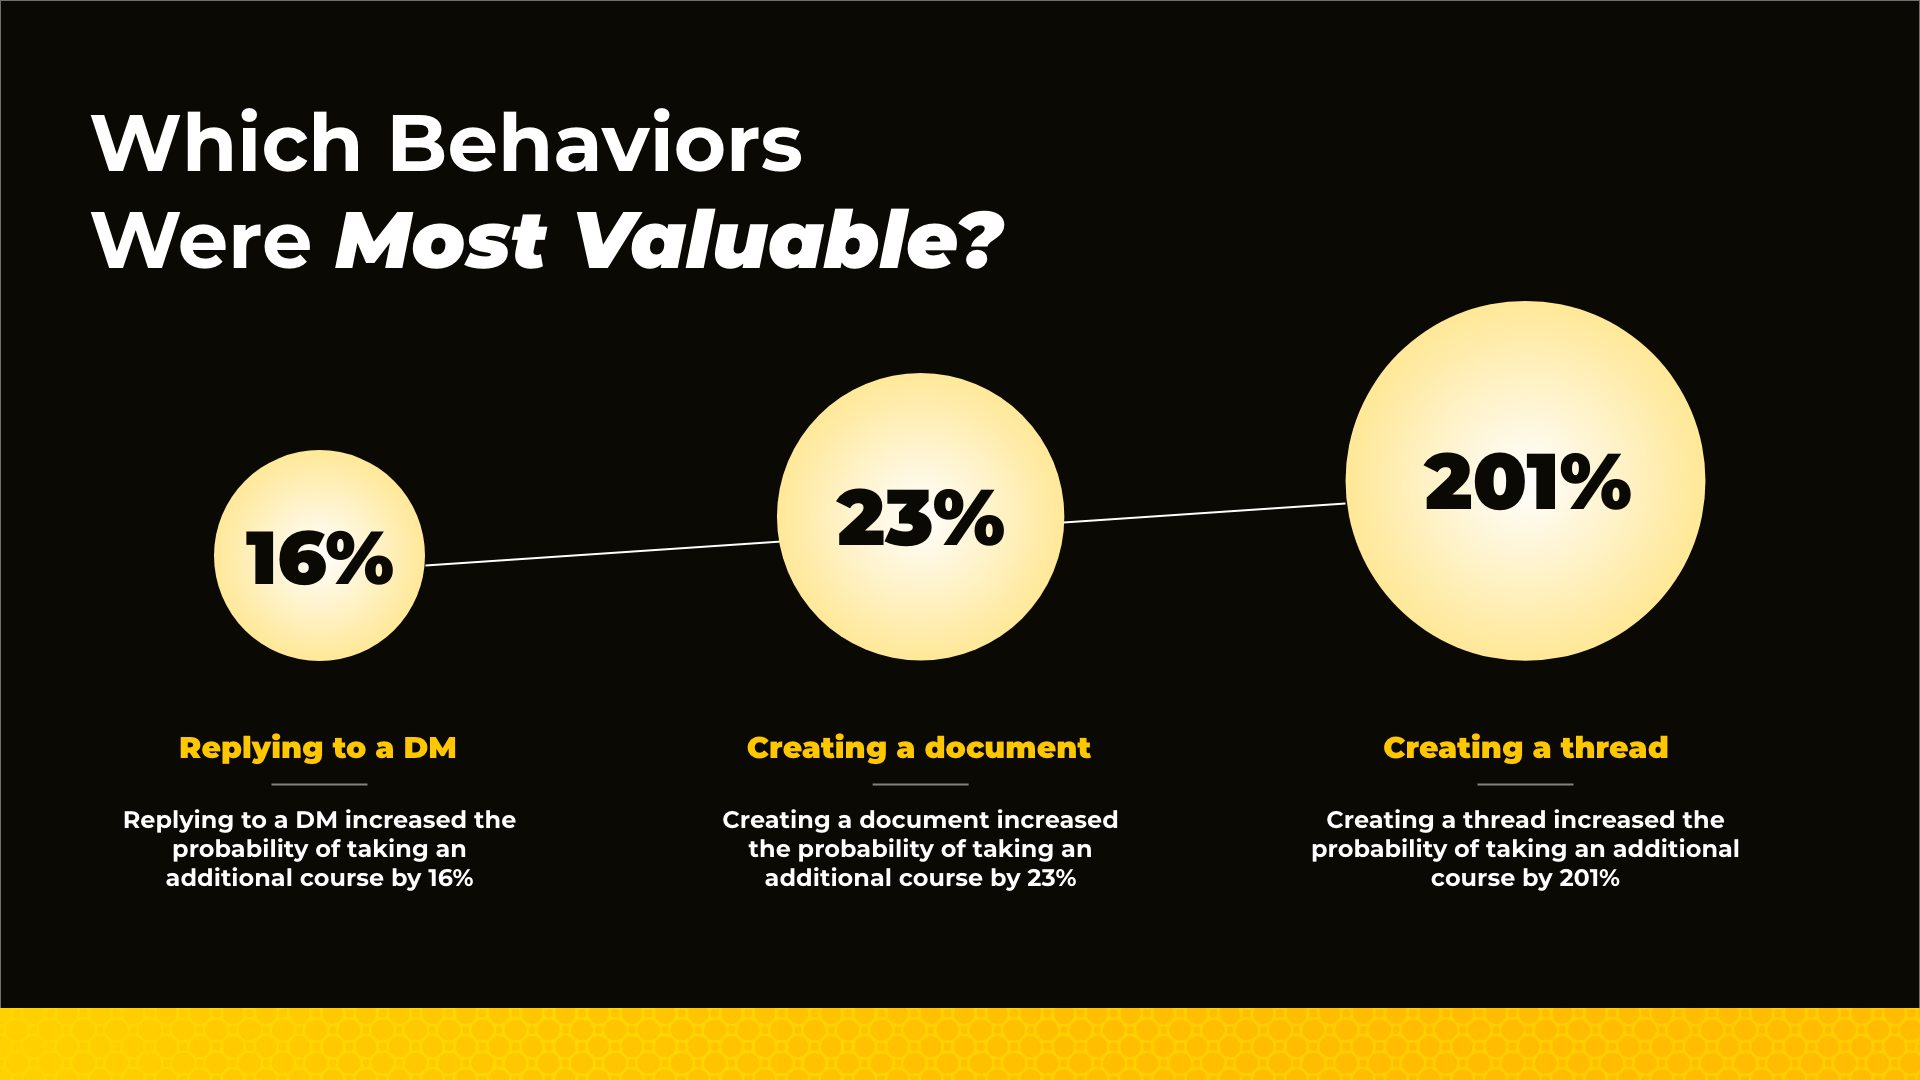 Community - which behaviors were most valuable?